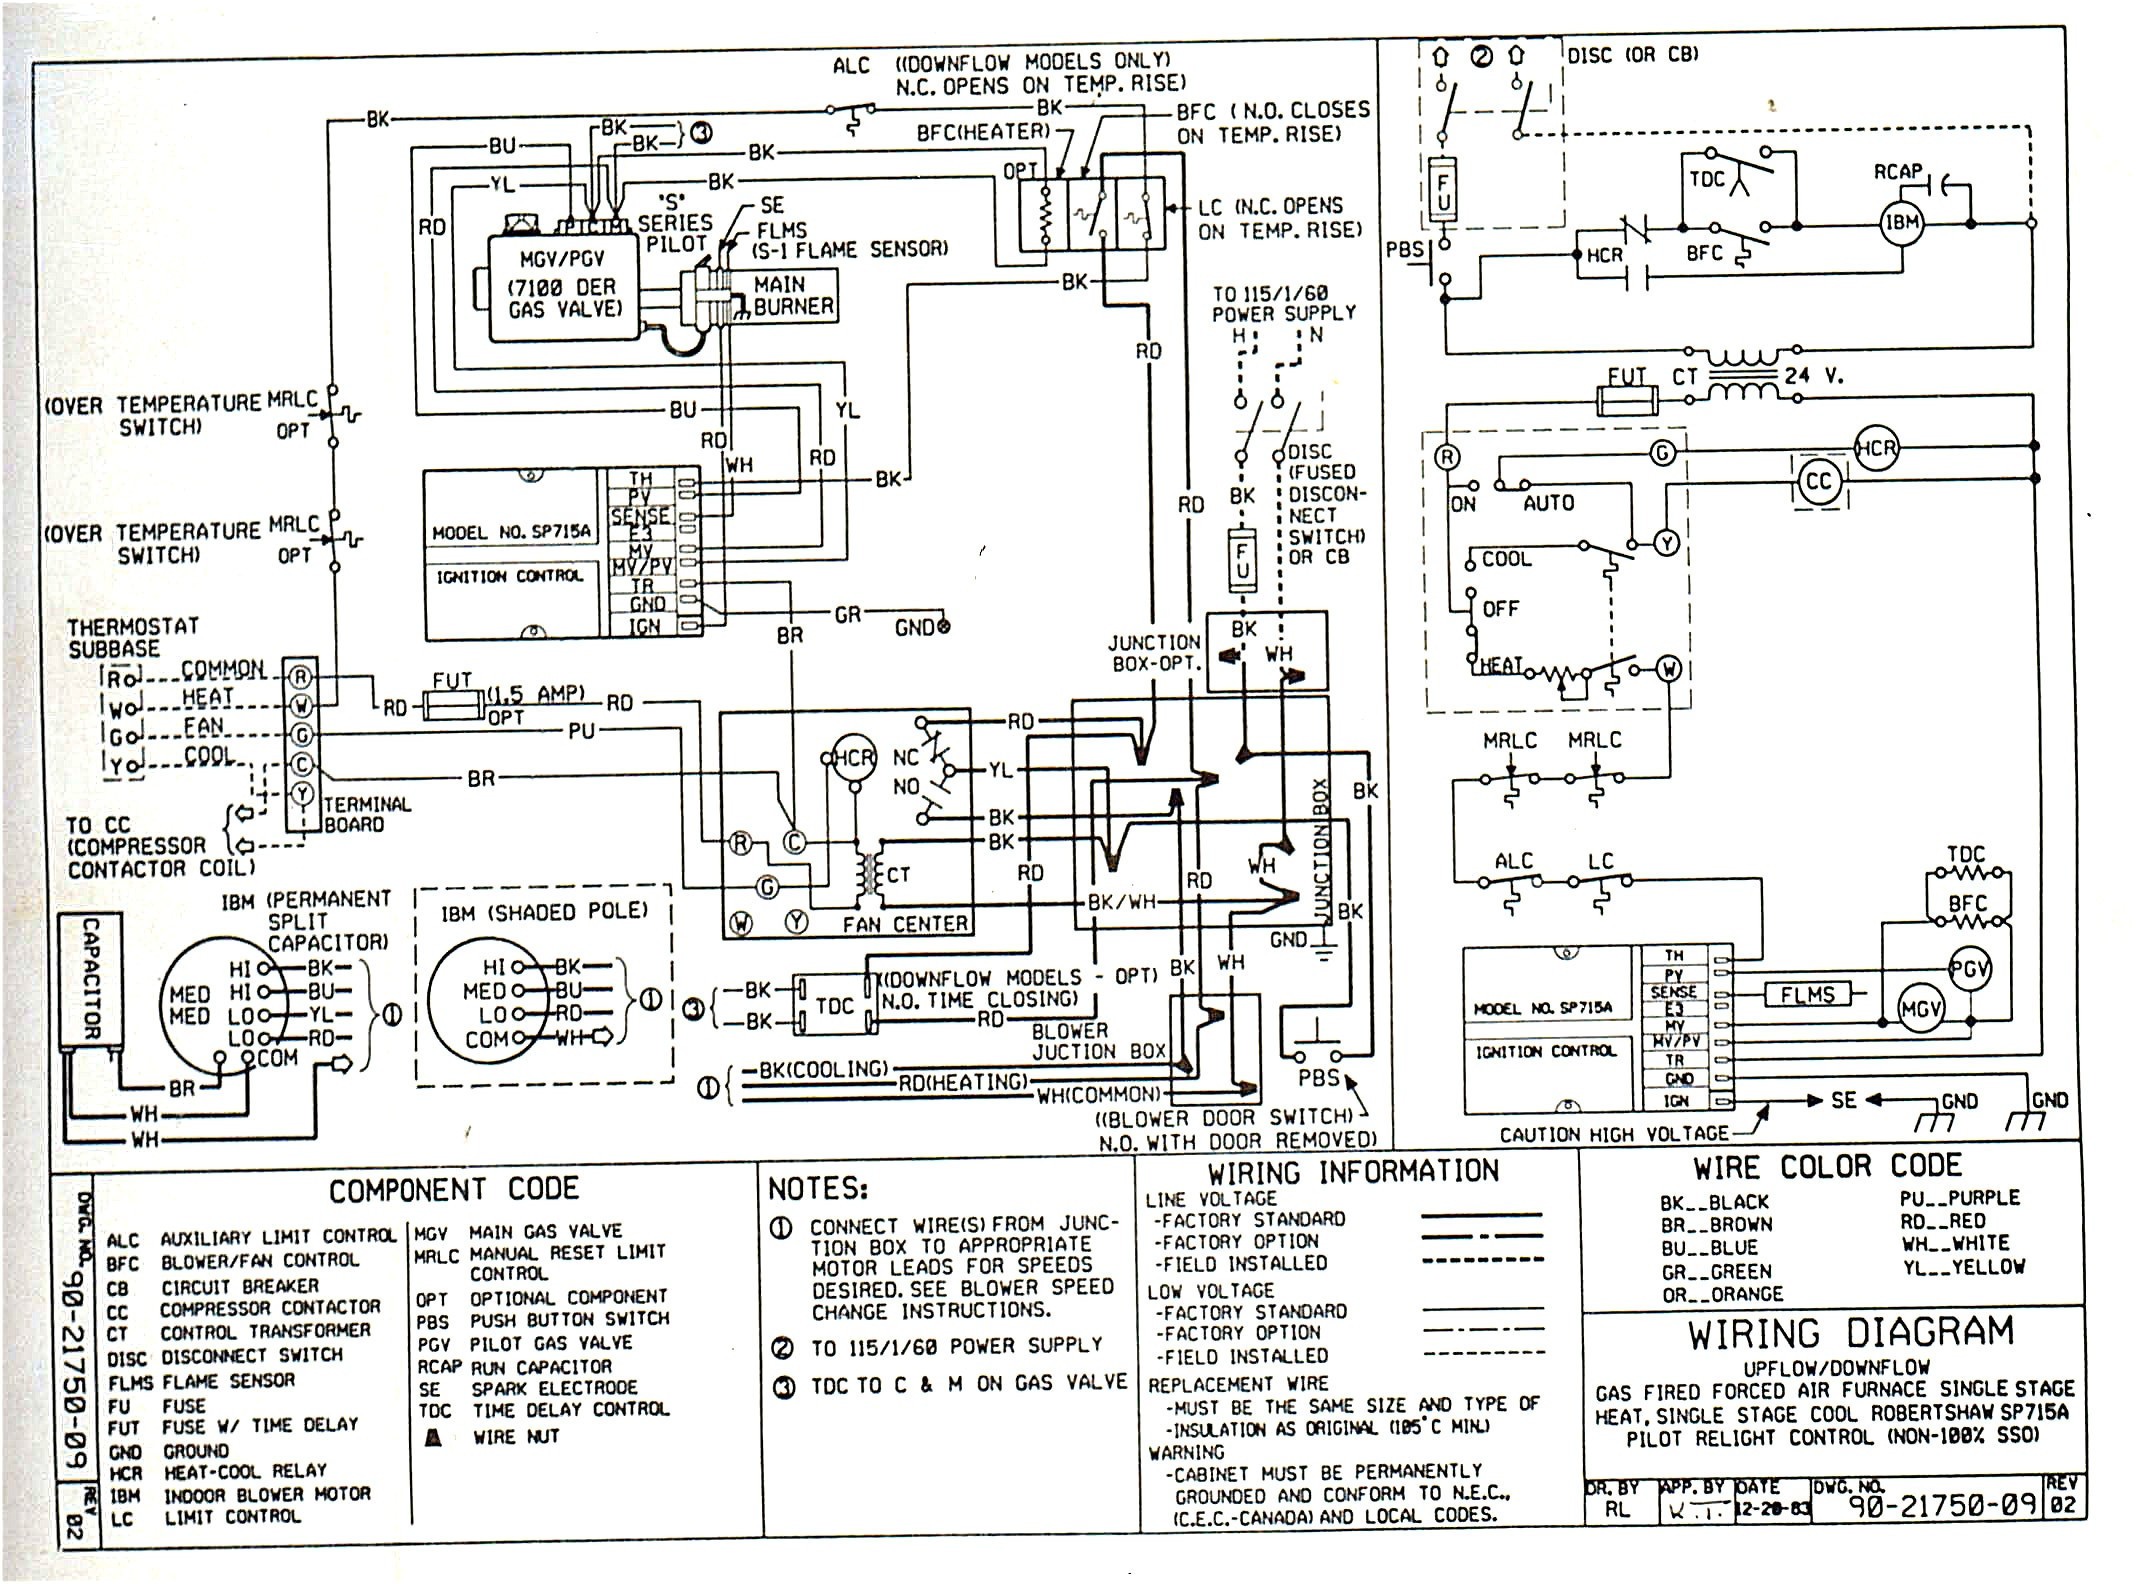 Wiring Diagram for A Gas Furnace Save Ge Gas Furnace Wiring Diagram Save Ge Furnace Wiring